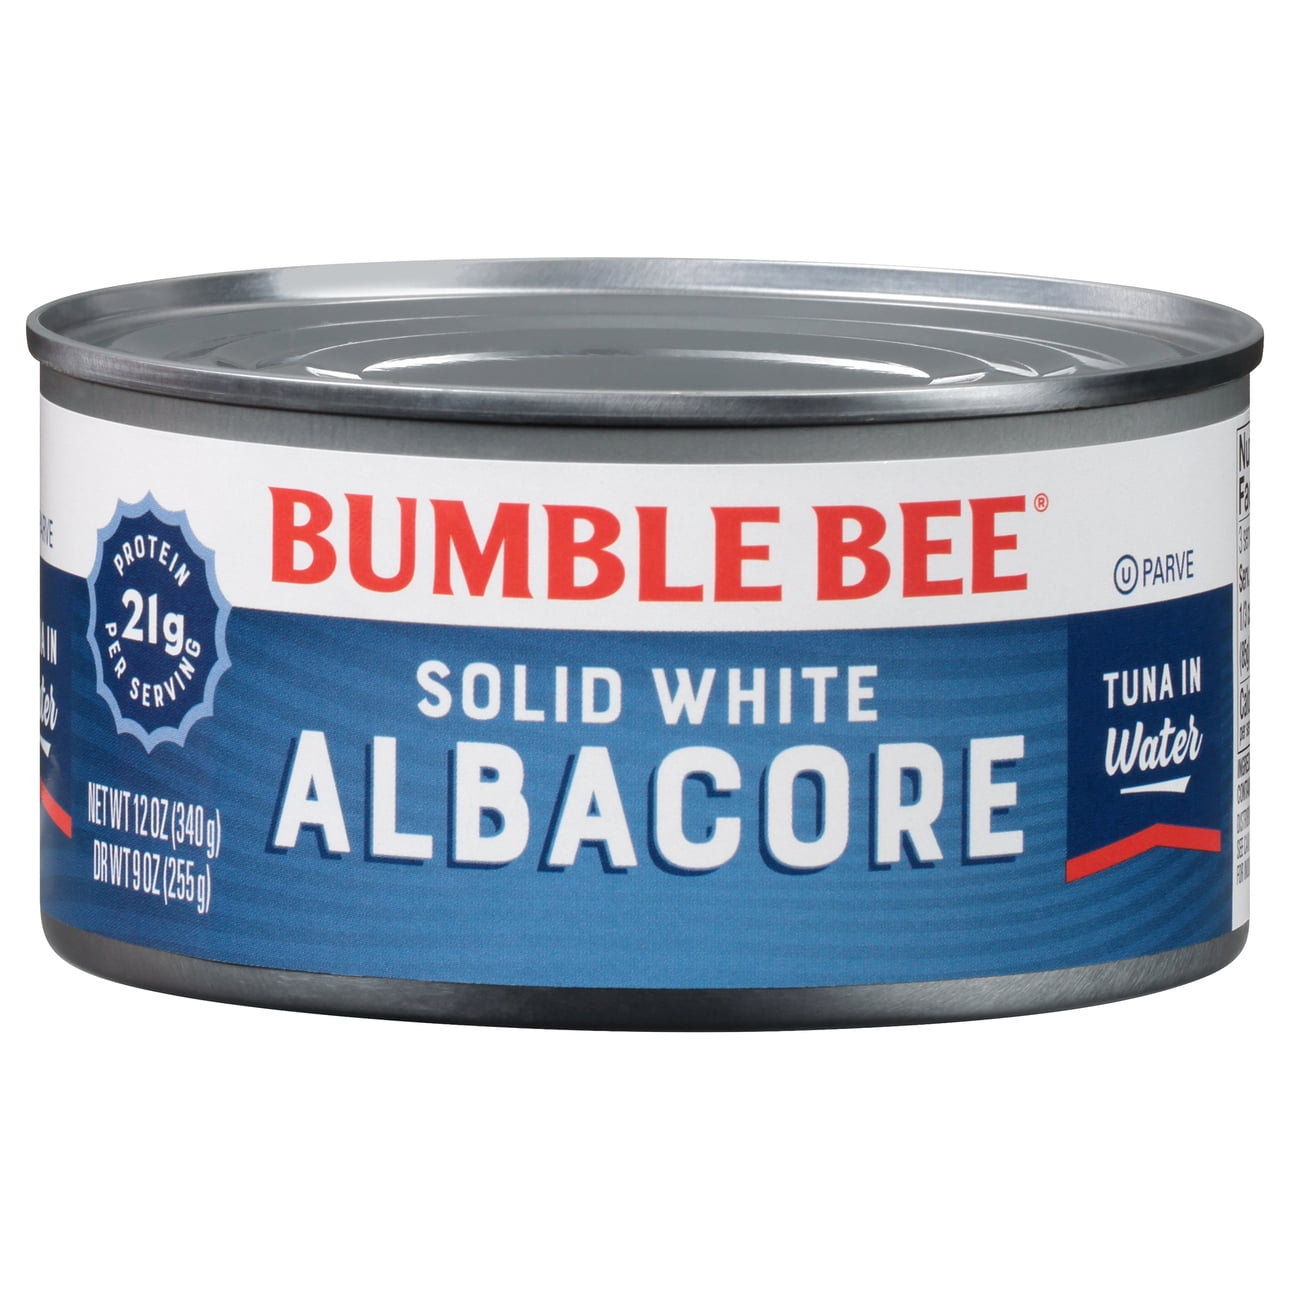 Bumble Bee Solid White Albacore Tuna in Water, 12 oz can